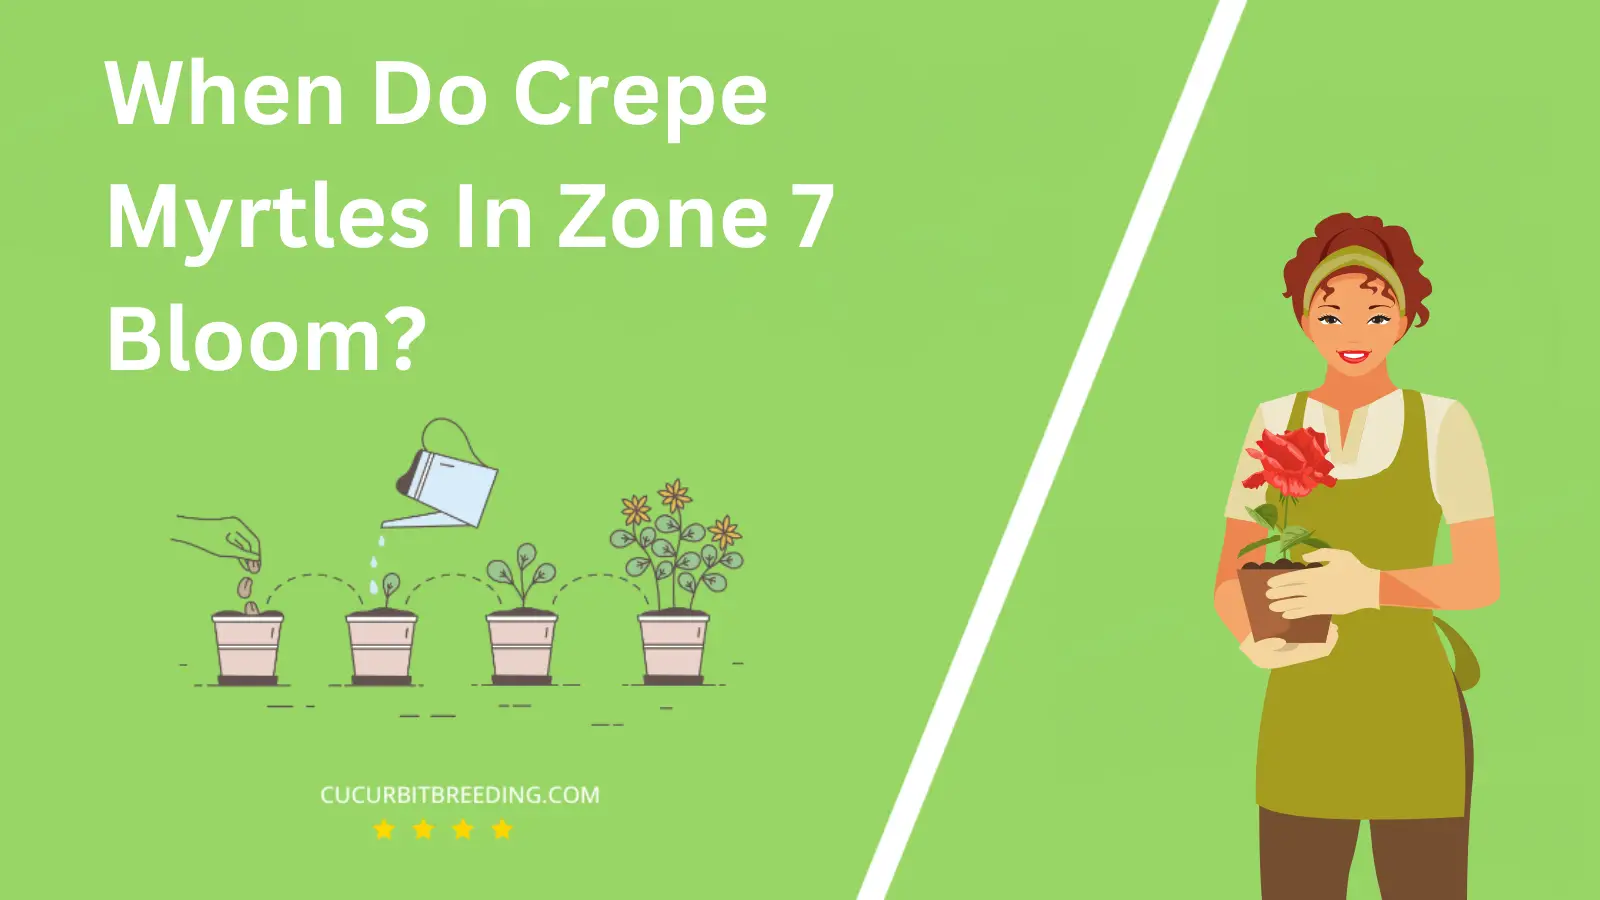 When Do Crepe Myrtles In Zone 7 Bloom?